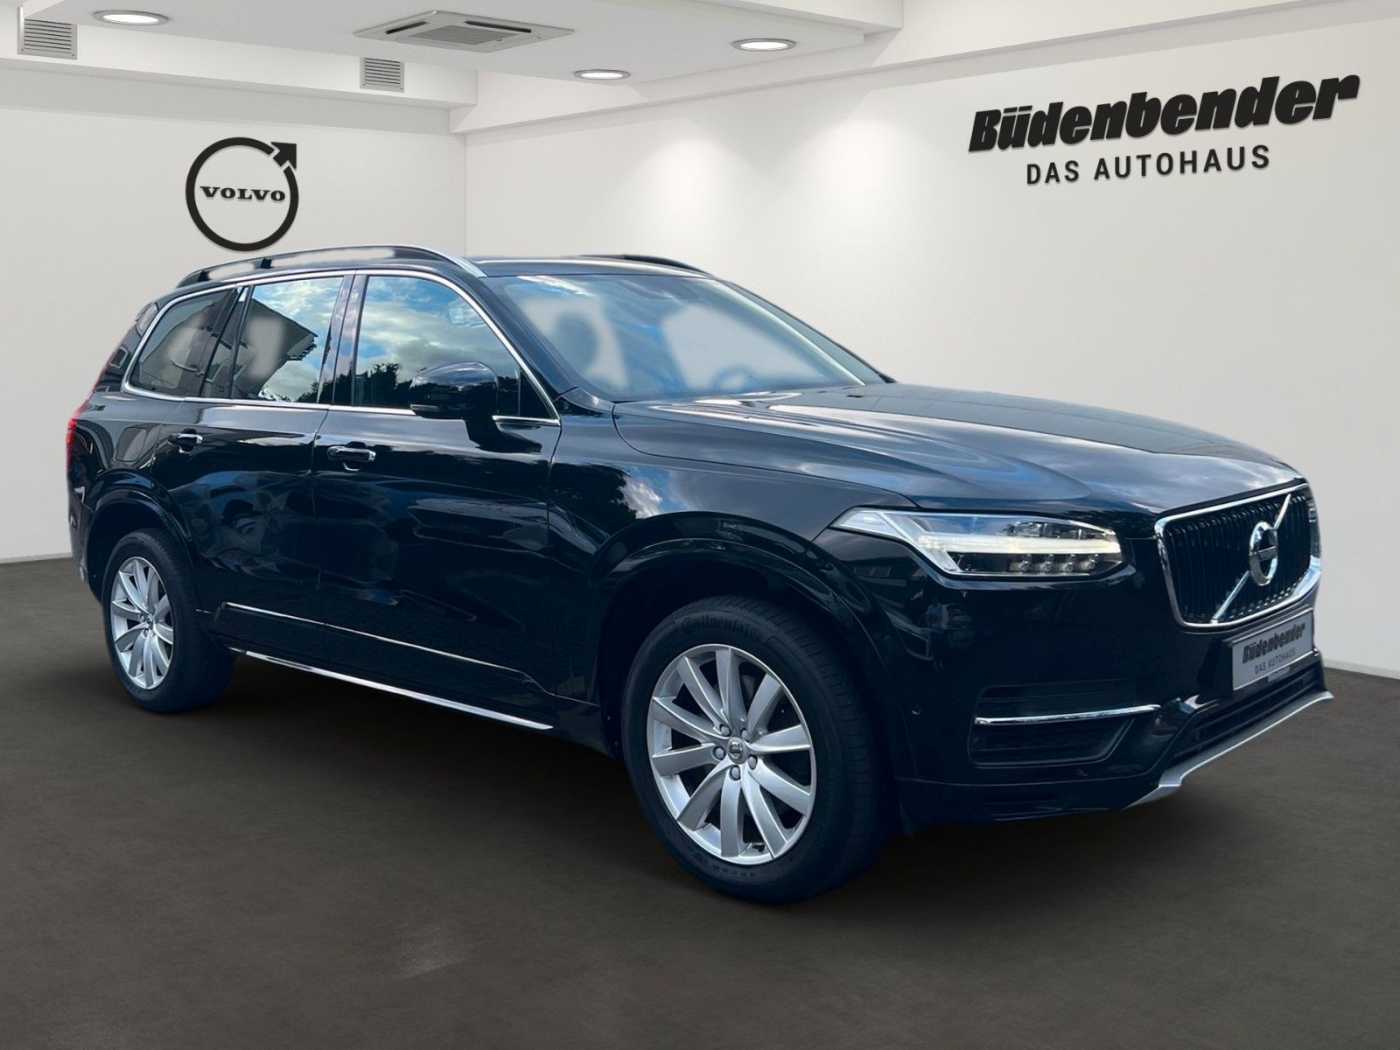 Volvo  XC90 D5 AWD Geartronic (173KW/235PS) Momentum (7-Sitzer) aut.